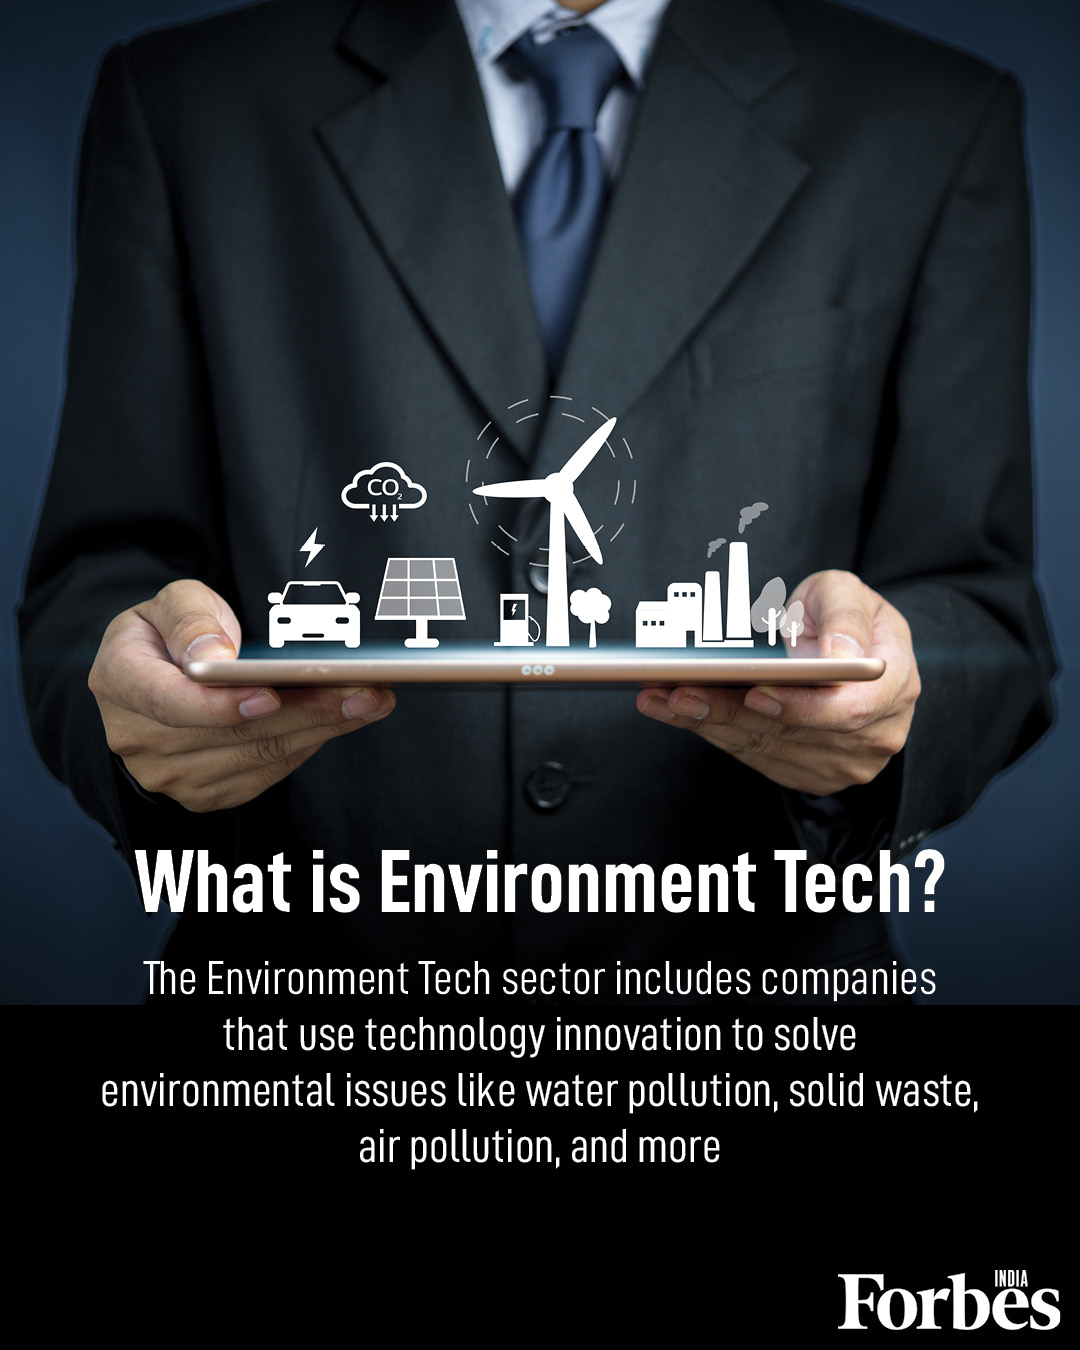 World Environment Day: The state of environment tech in India